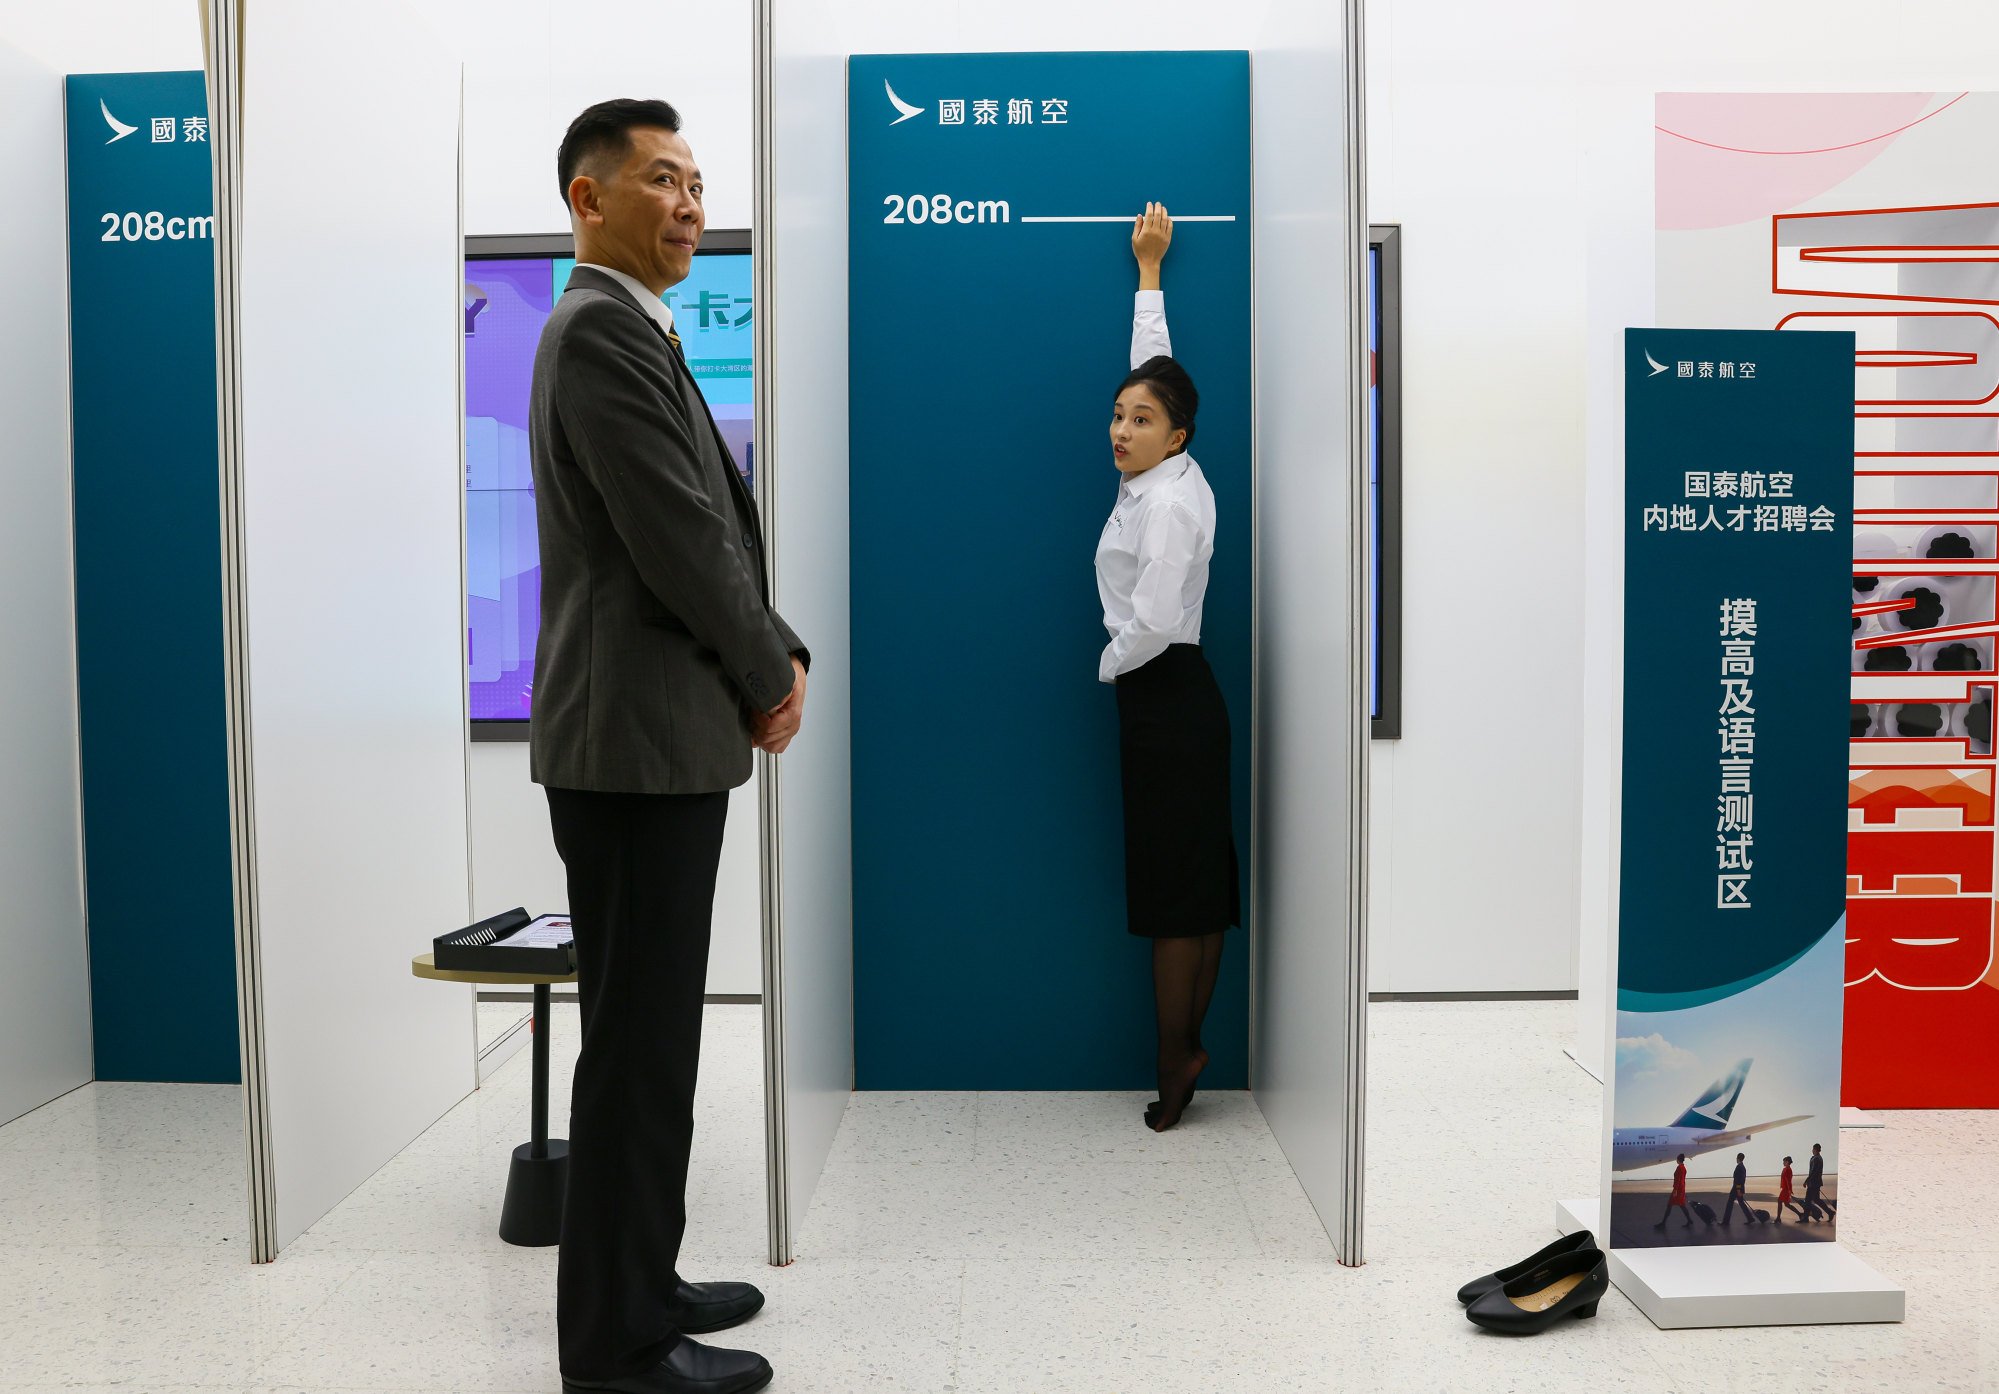 A mainland Chinese woman applies to be a cabin crew member during a recruitment drive in Shenzhen last year. The airline plans to employ 4,000 staff from mainland China by the end of 2025. Photo: Dickson Lee